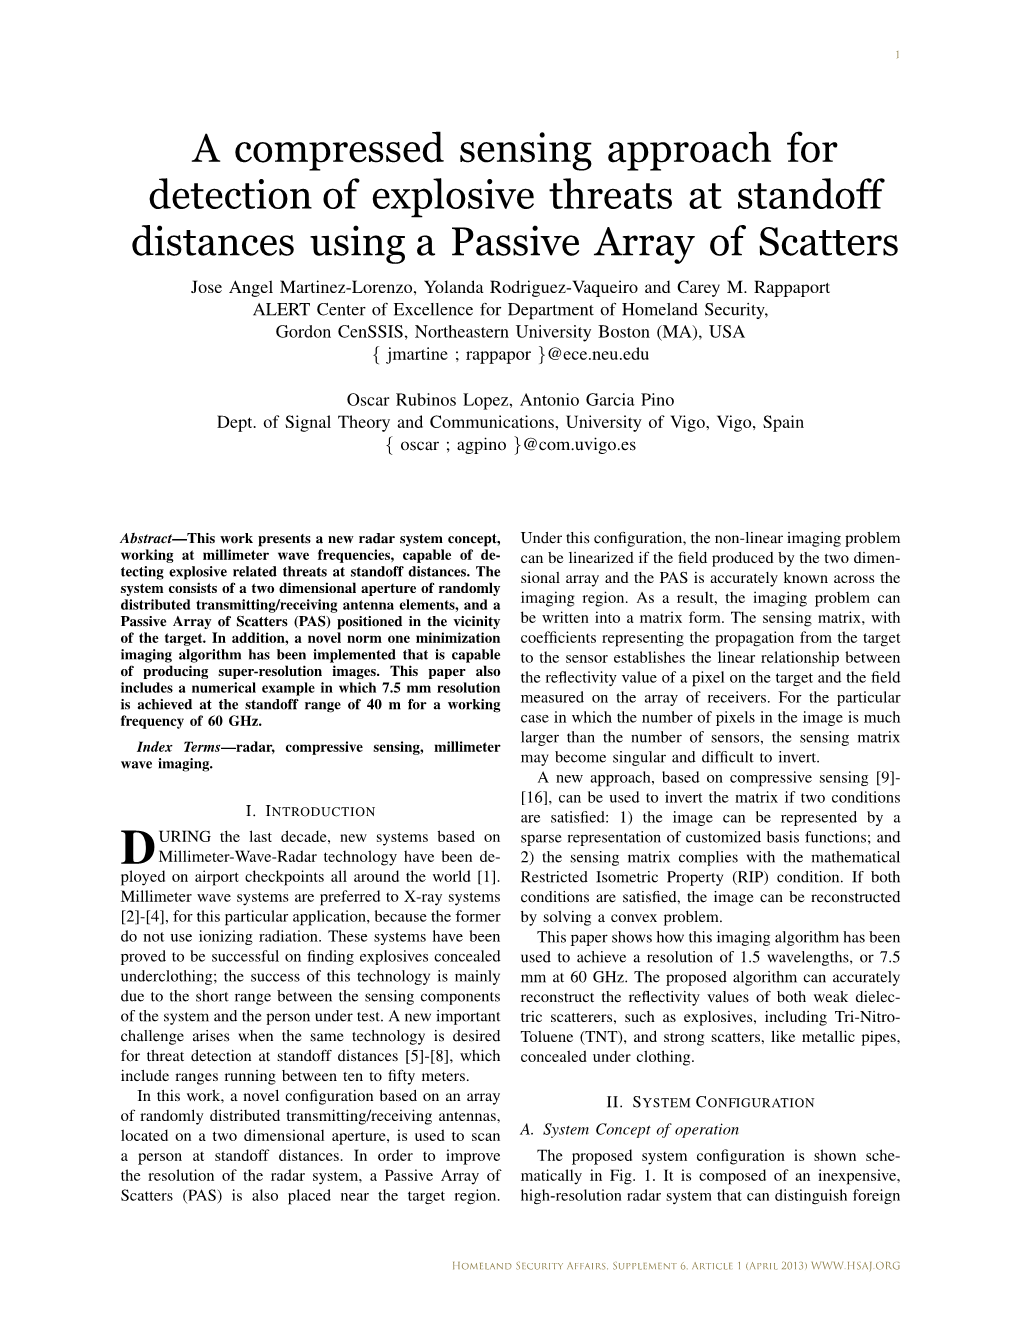 A Compressed Sensing Approach for Detection of Explosive Threats At